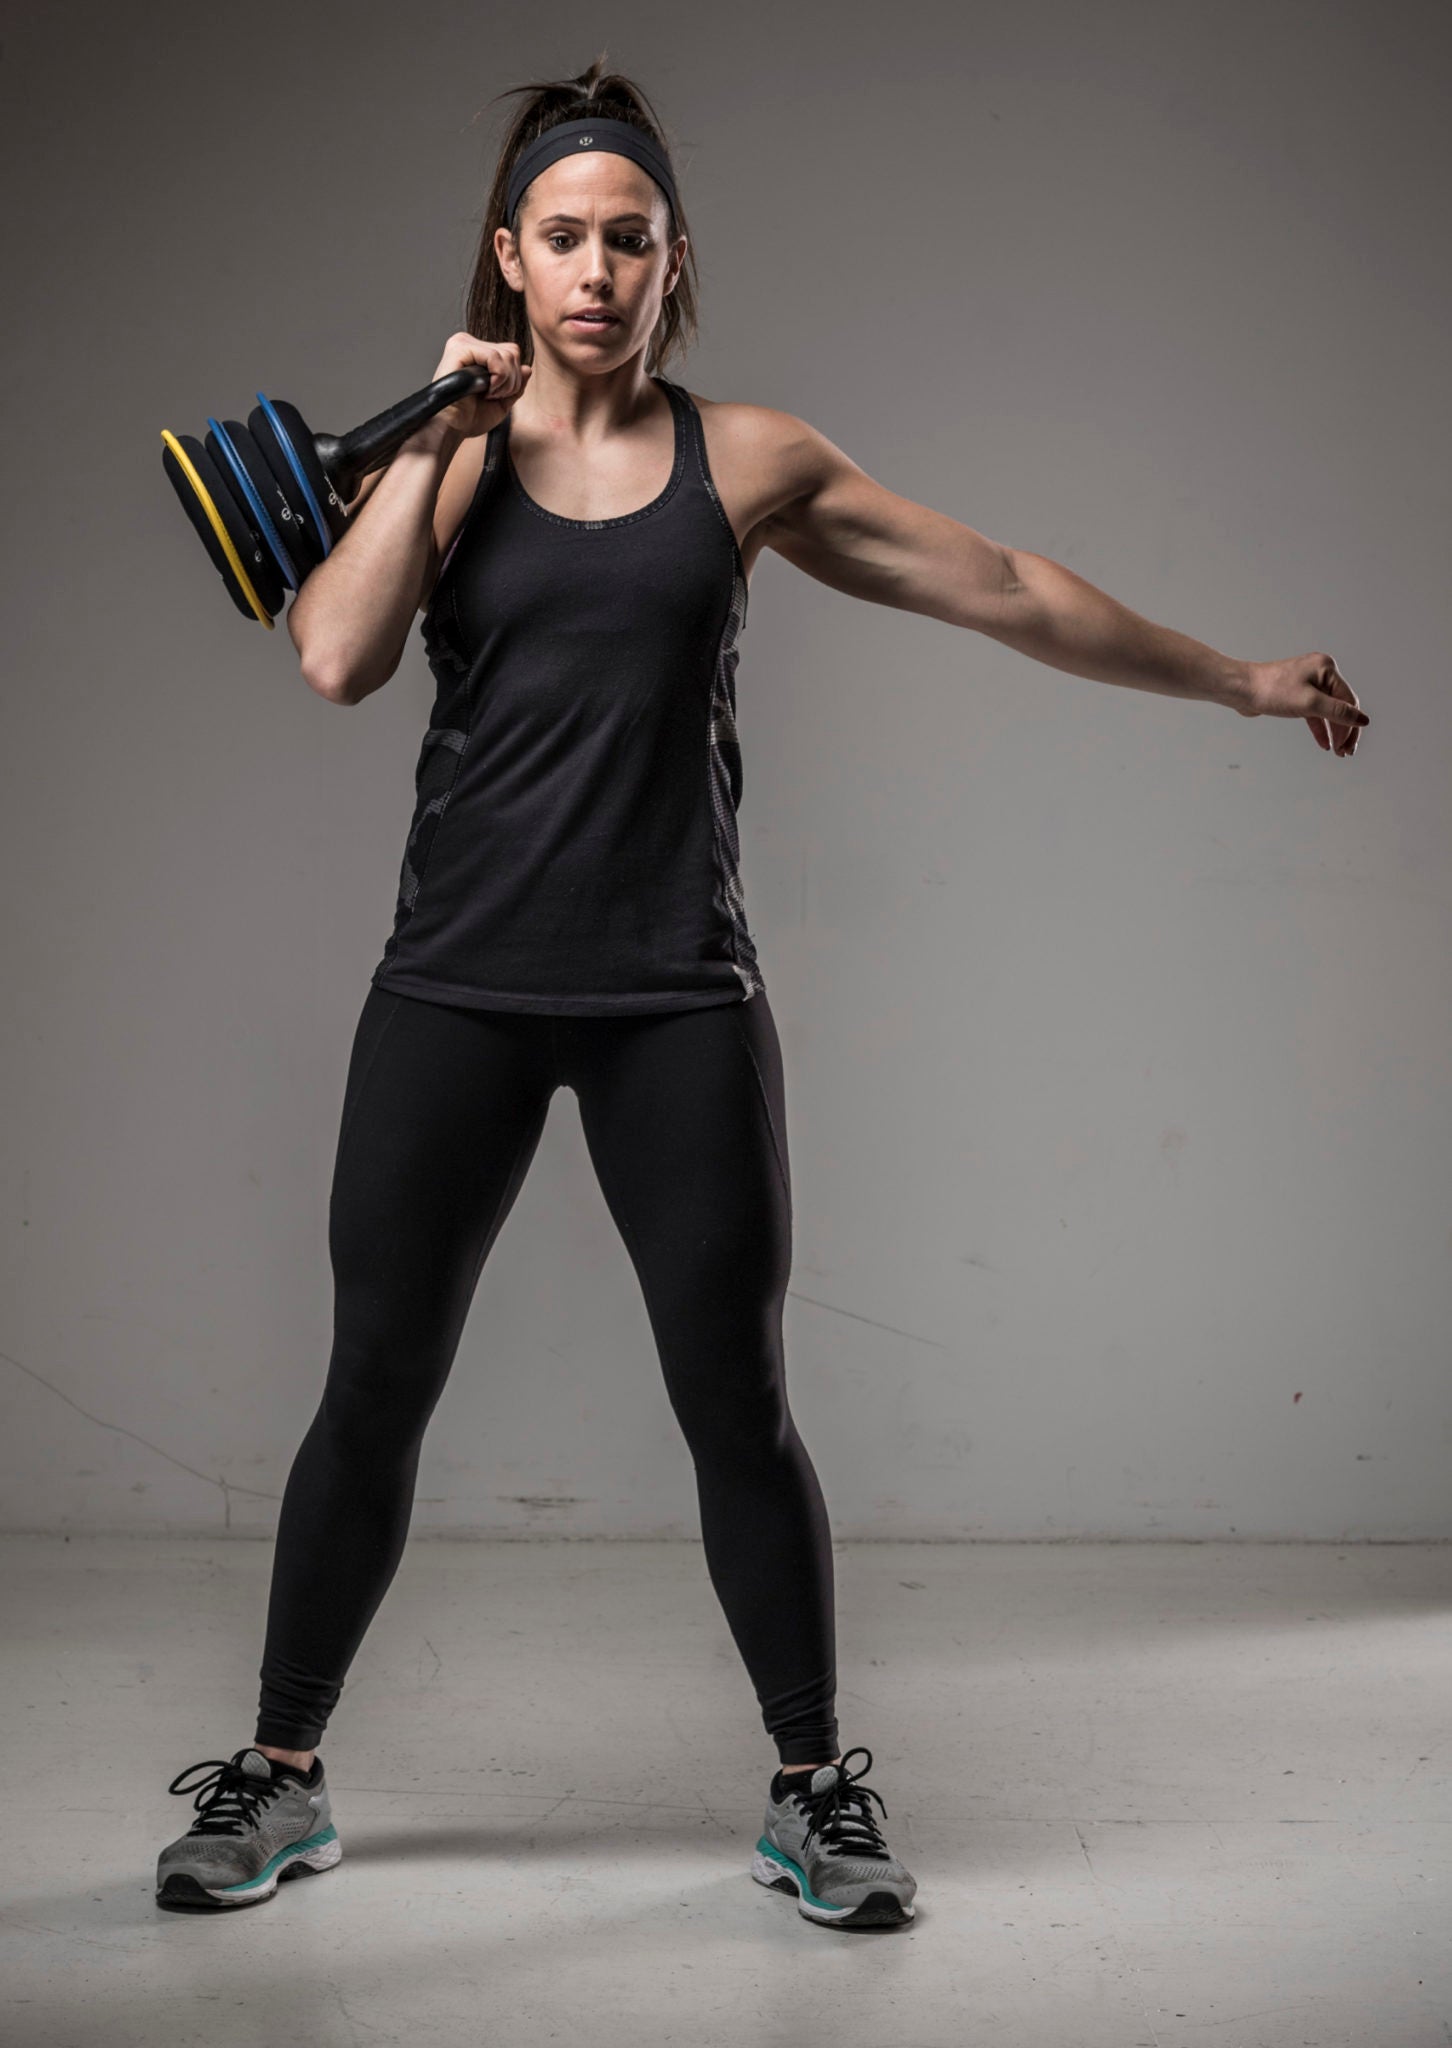 picture of a female fitness model holding a SoftBell soft kettlebell against her shoulder preparing to press overhead